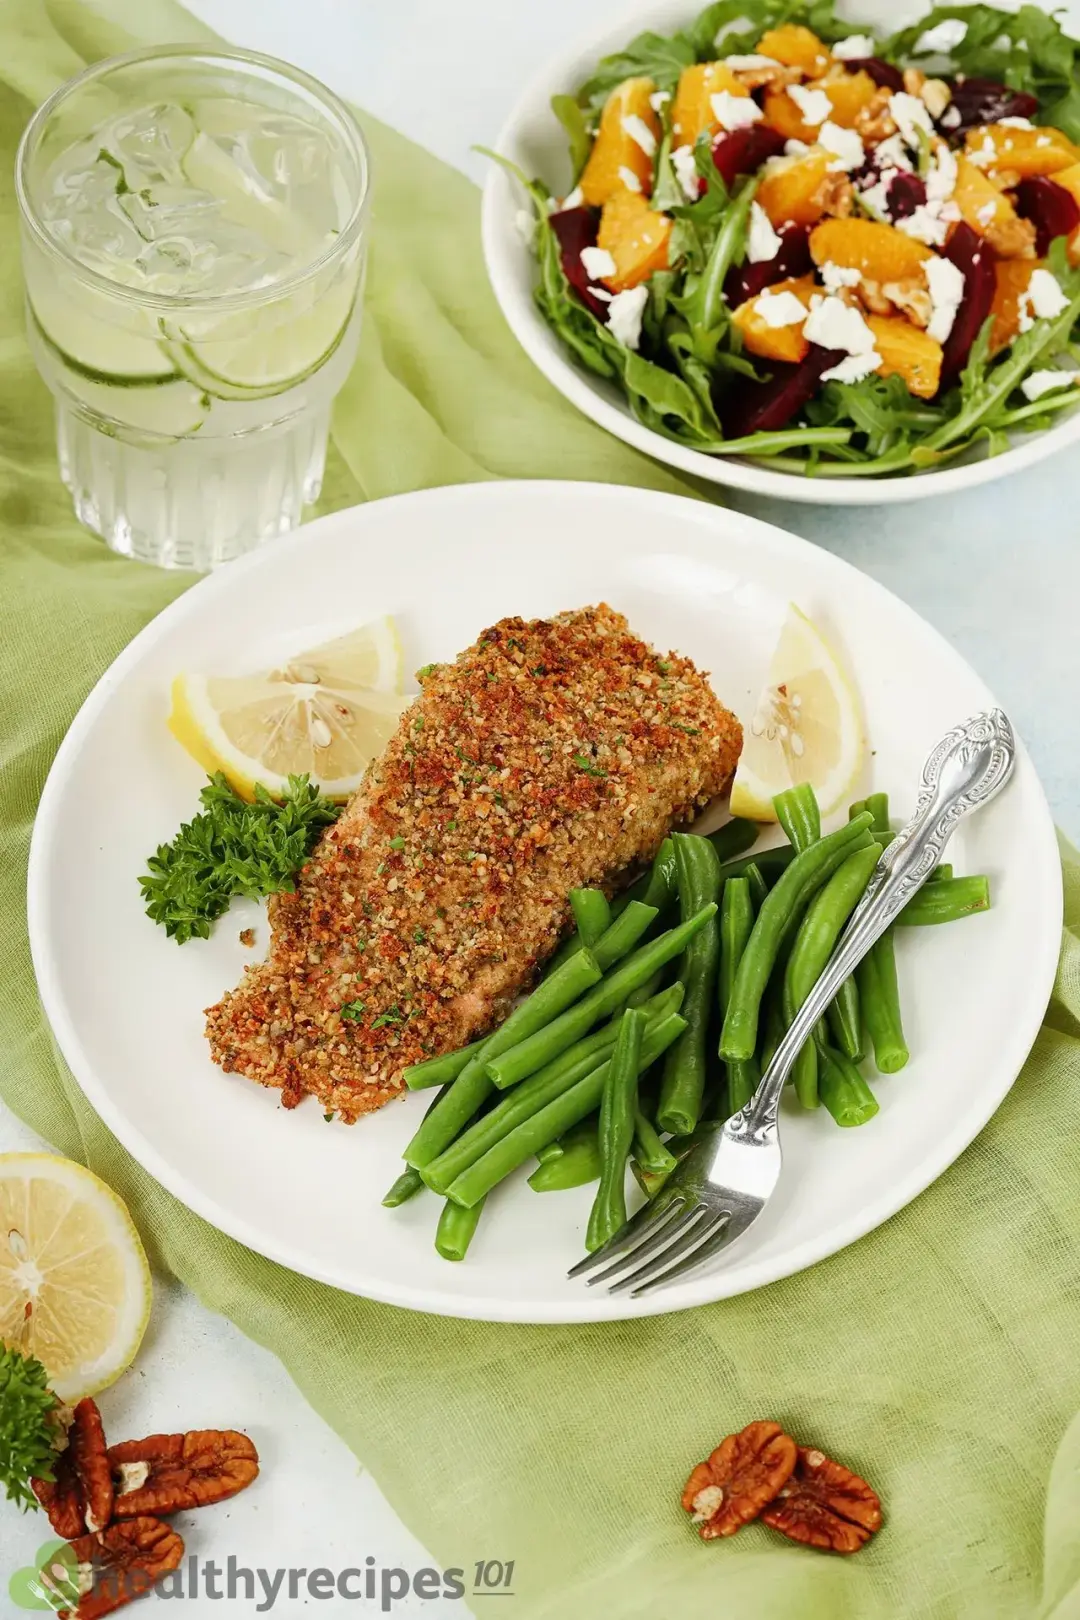 A big plate of one pecan-crusted salmon filet, cooked green beans, parsley, lemon slices, and a fork; the surroundings are a small plate of salad, a small cup of lime juice, a lemon slice, and some pecans.